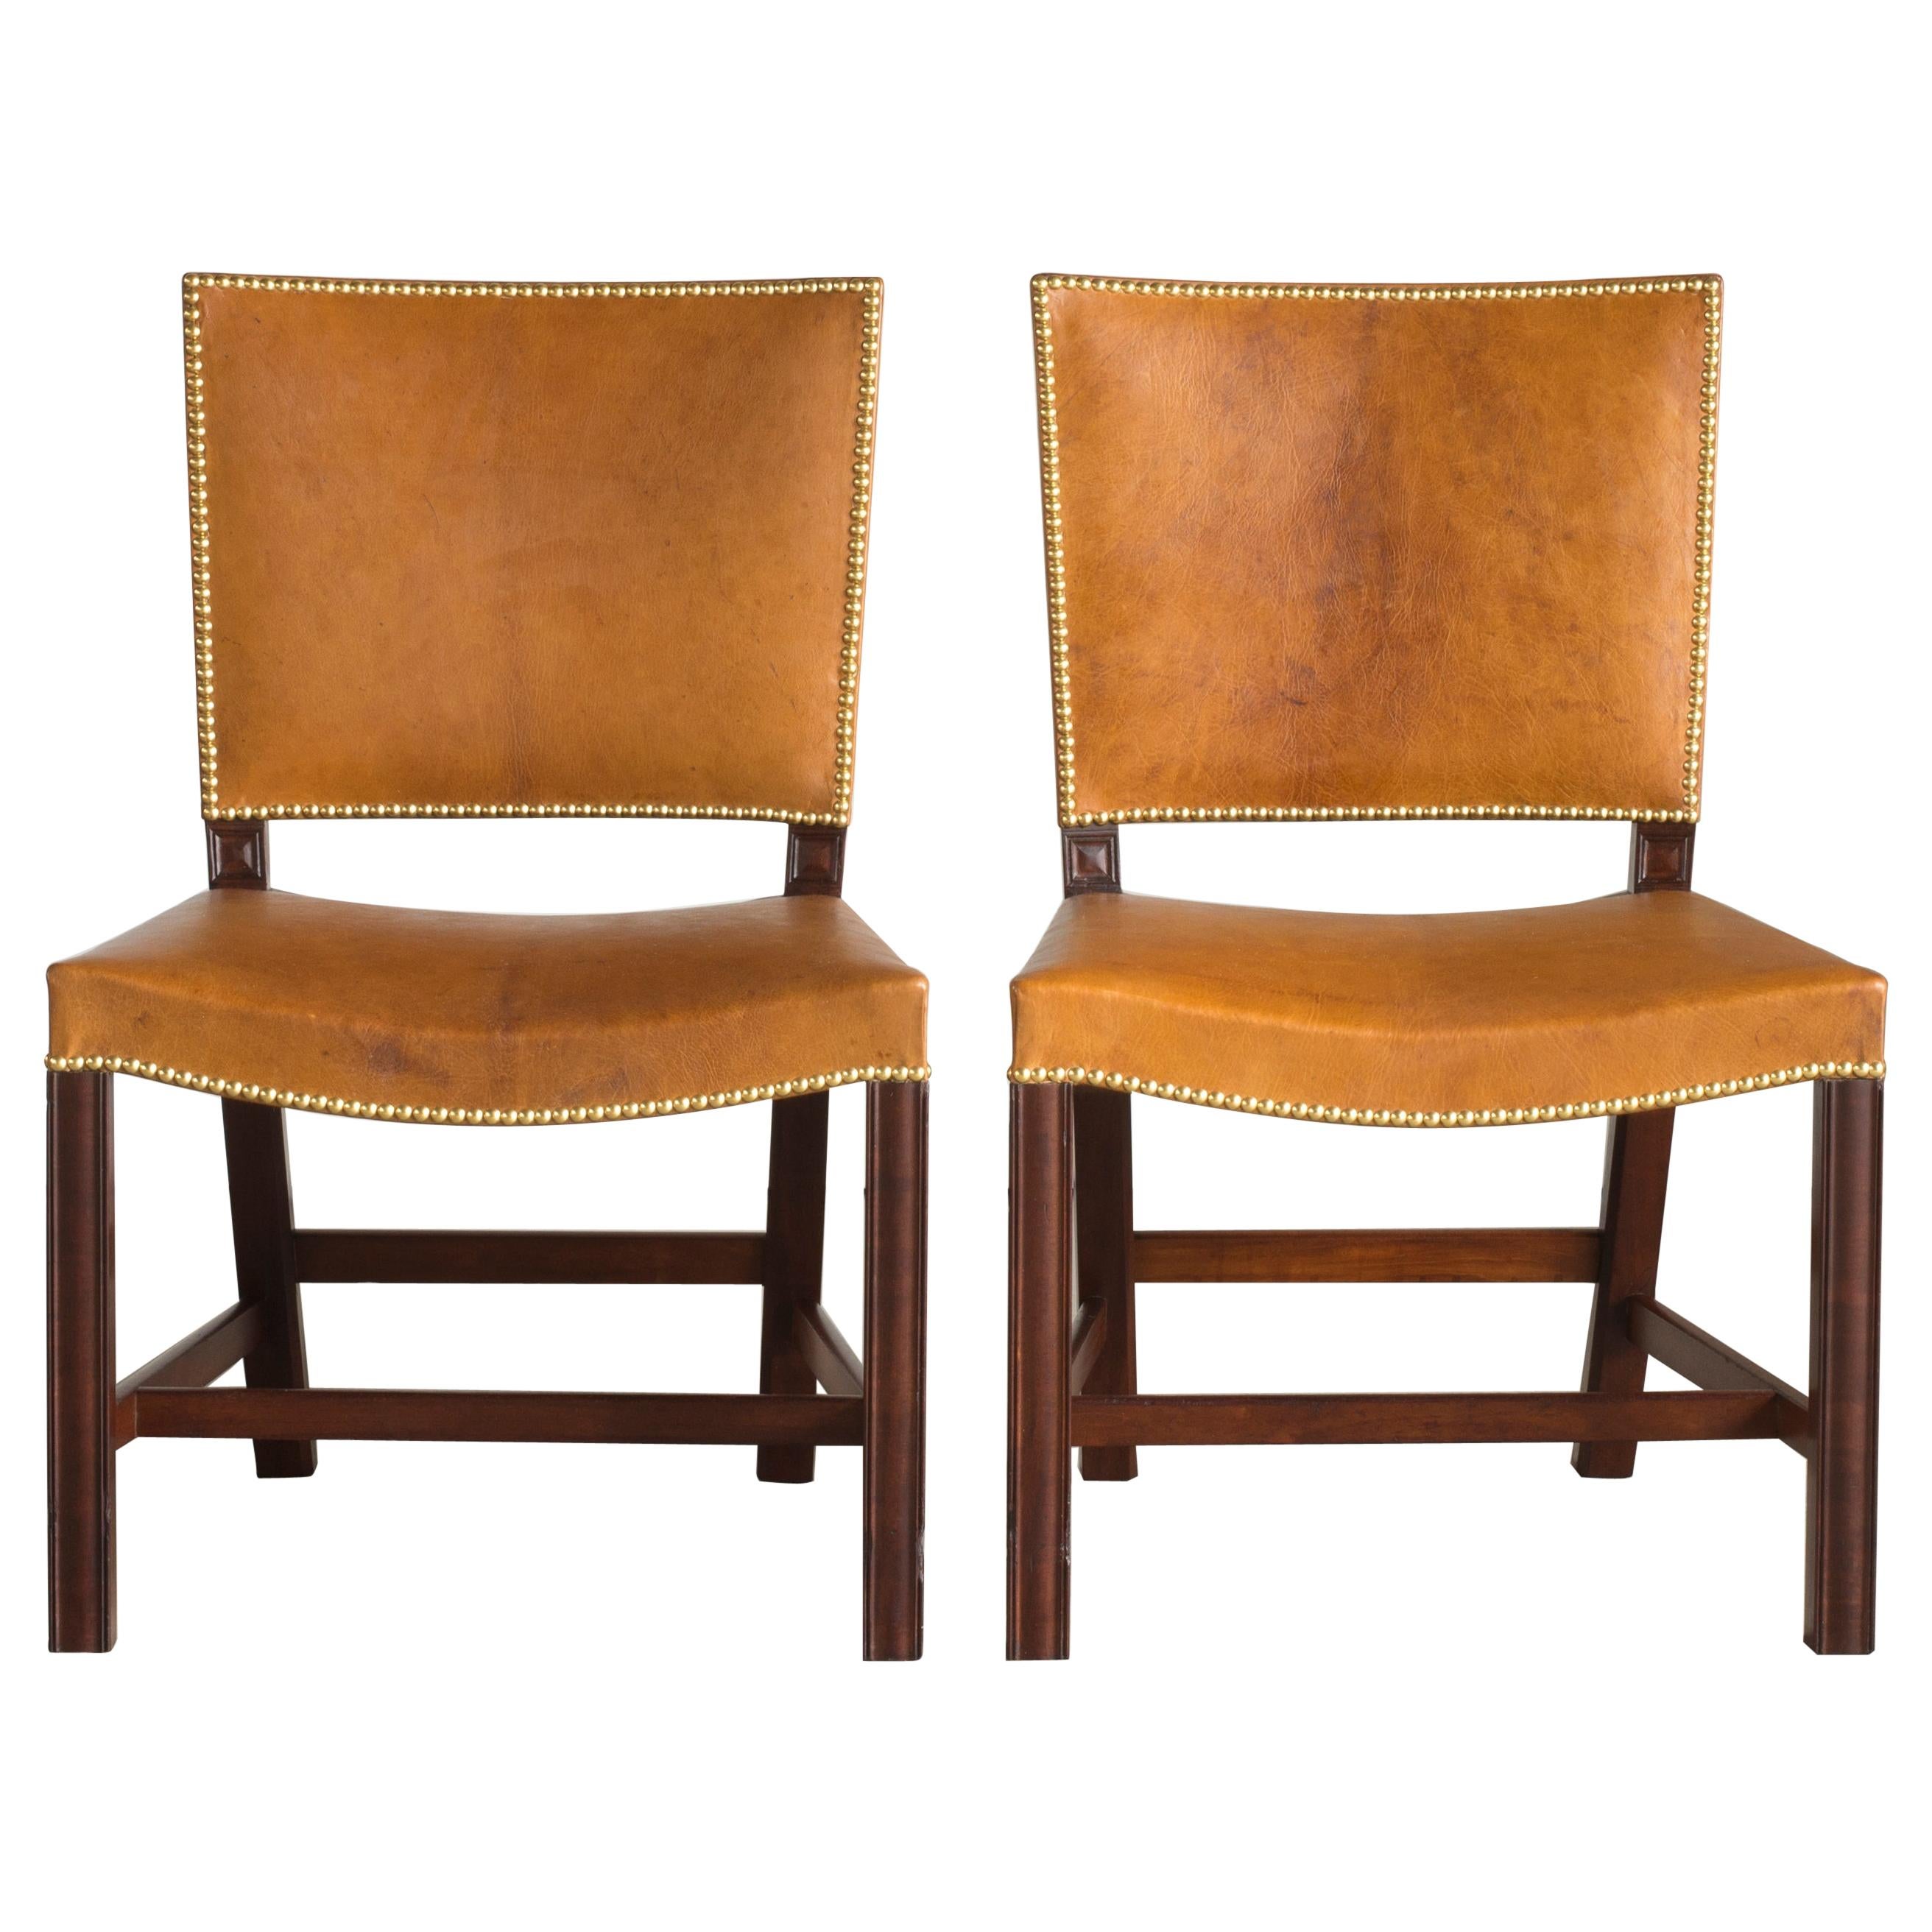 Kaare Klint Red Chairs of Cuban Mahogany and Niger Leather